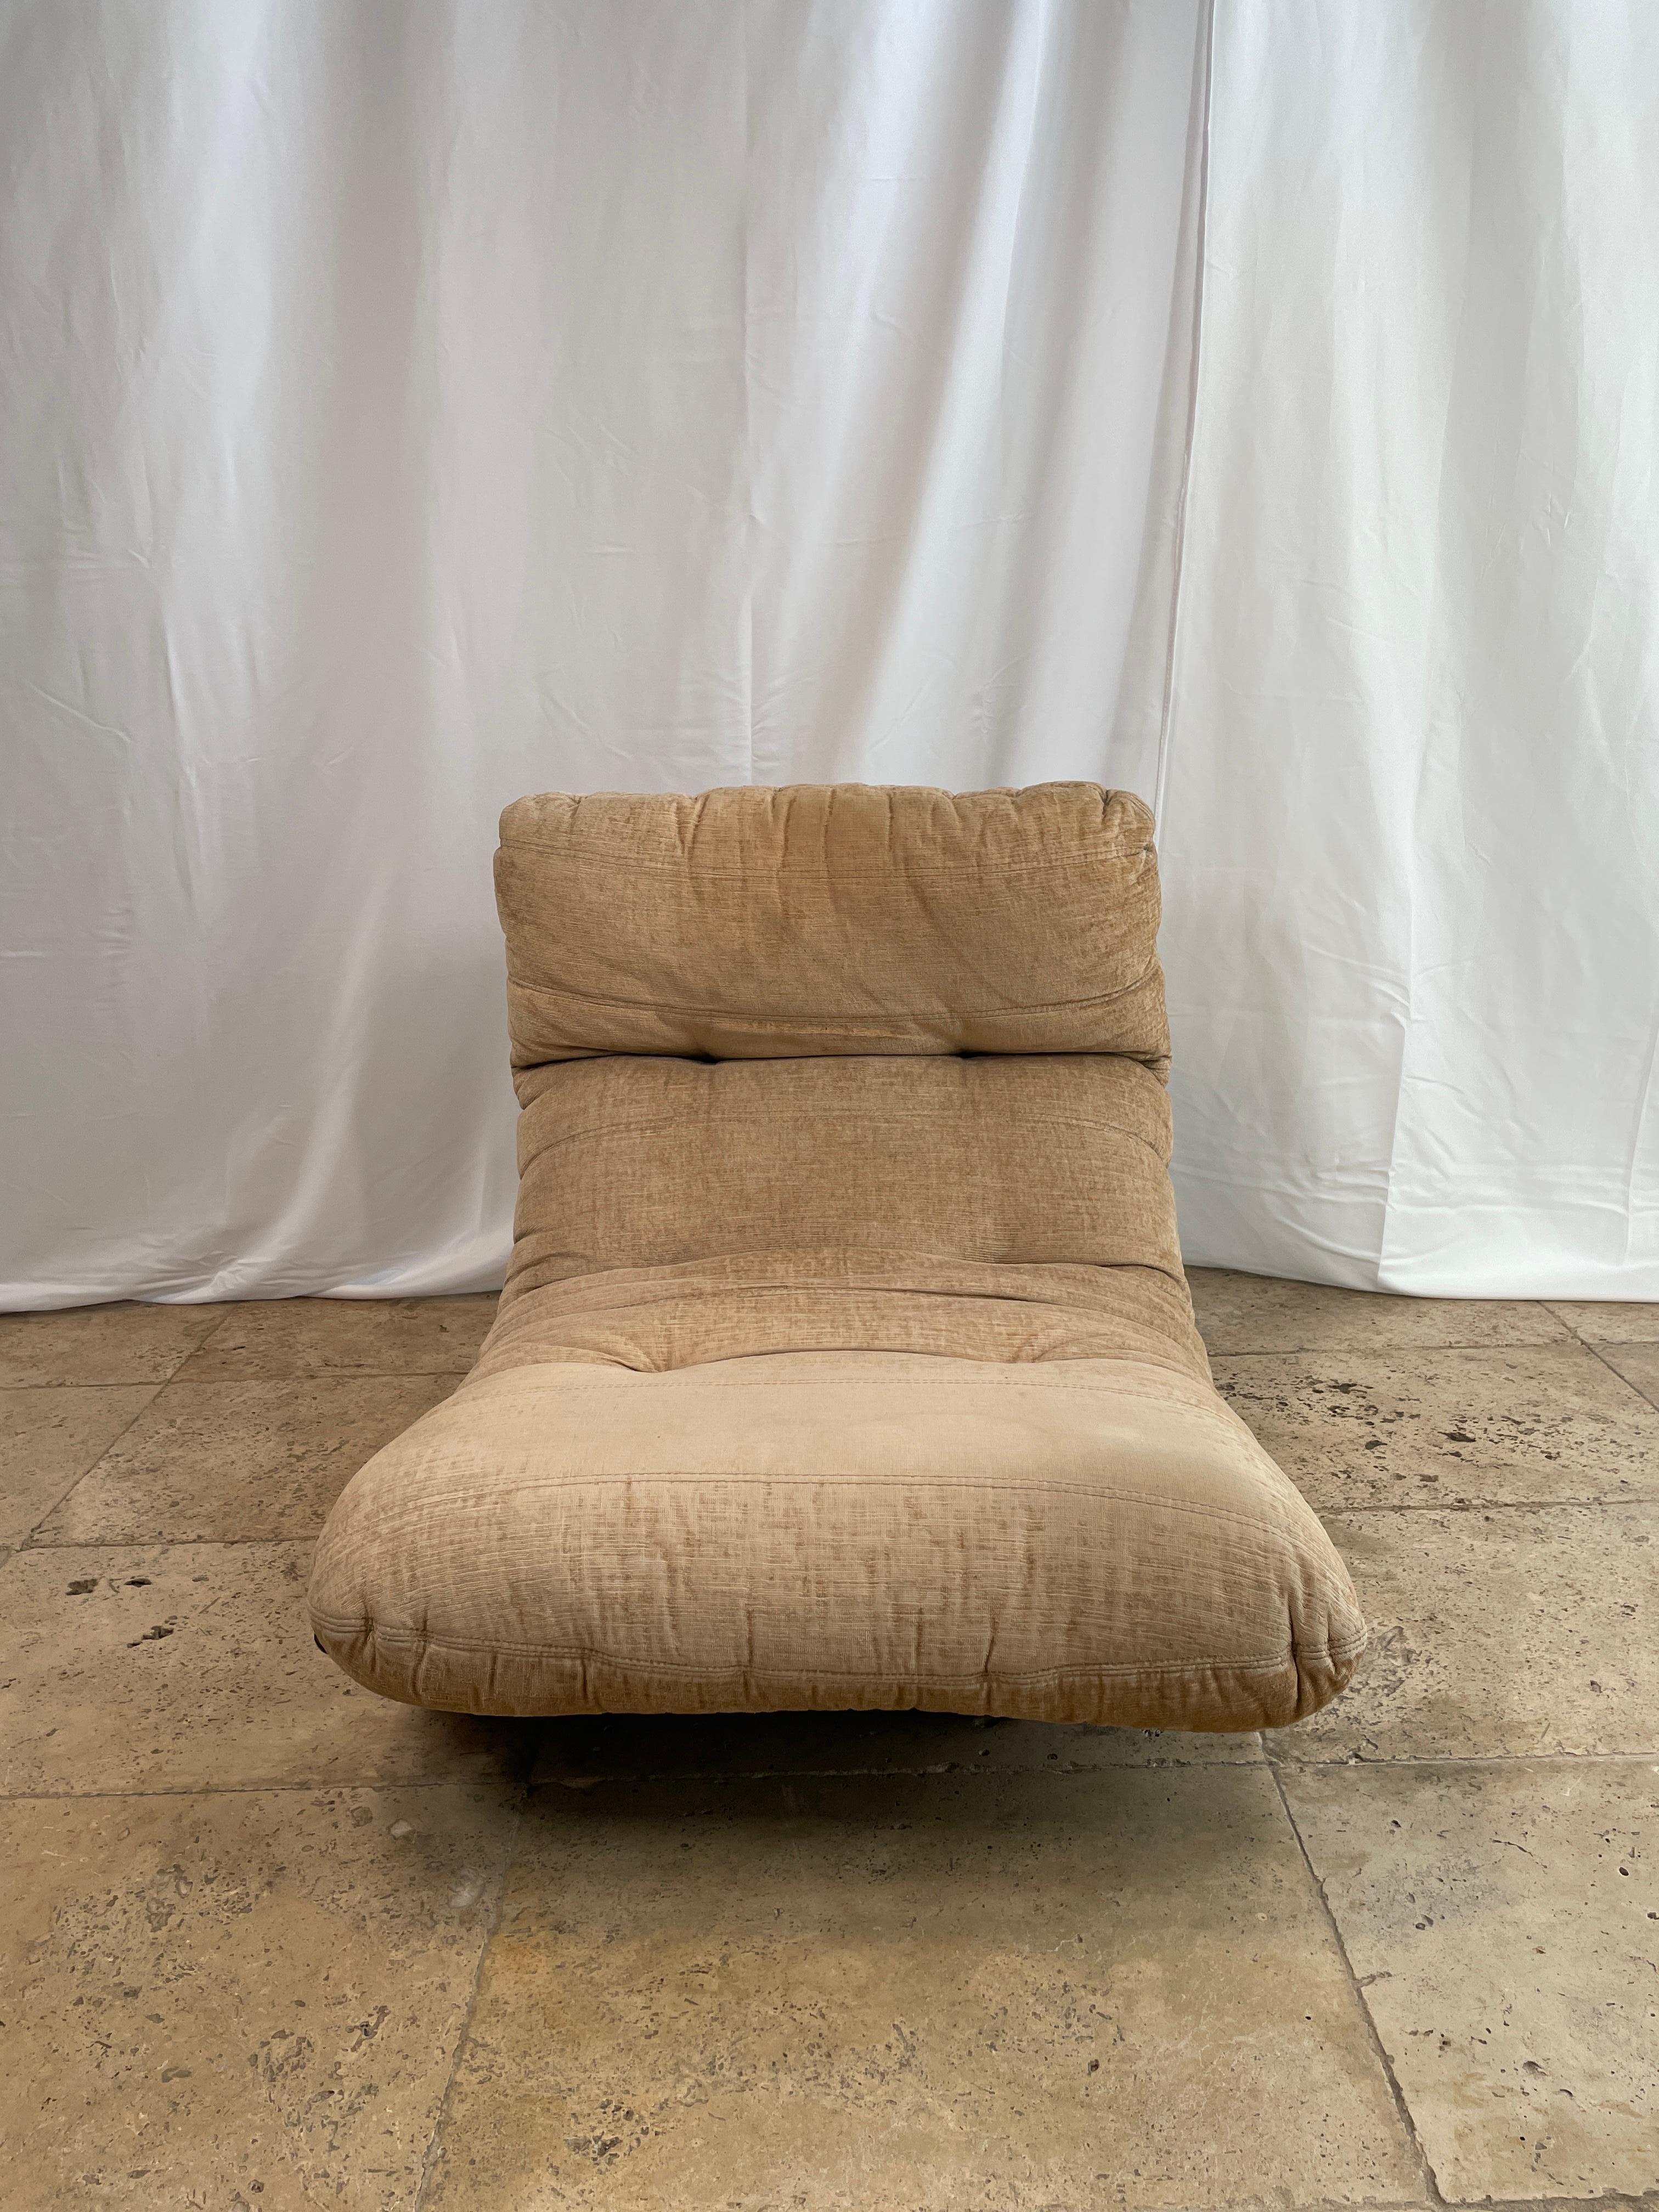 Late 20th Century Set of 5 Marsala Chairs in Original Fabric by Michel Ducaroy for Lignet Roset